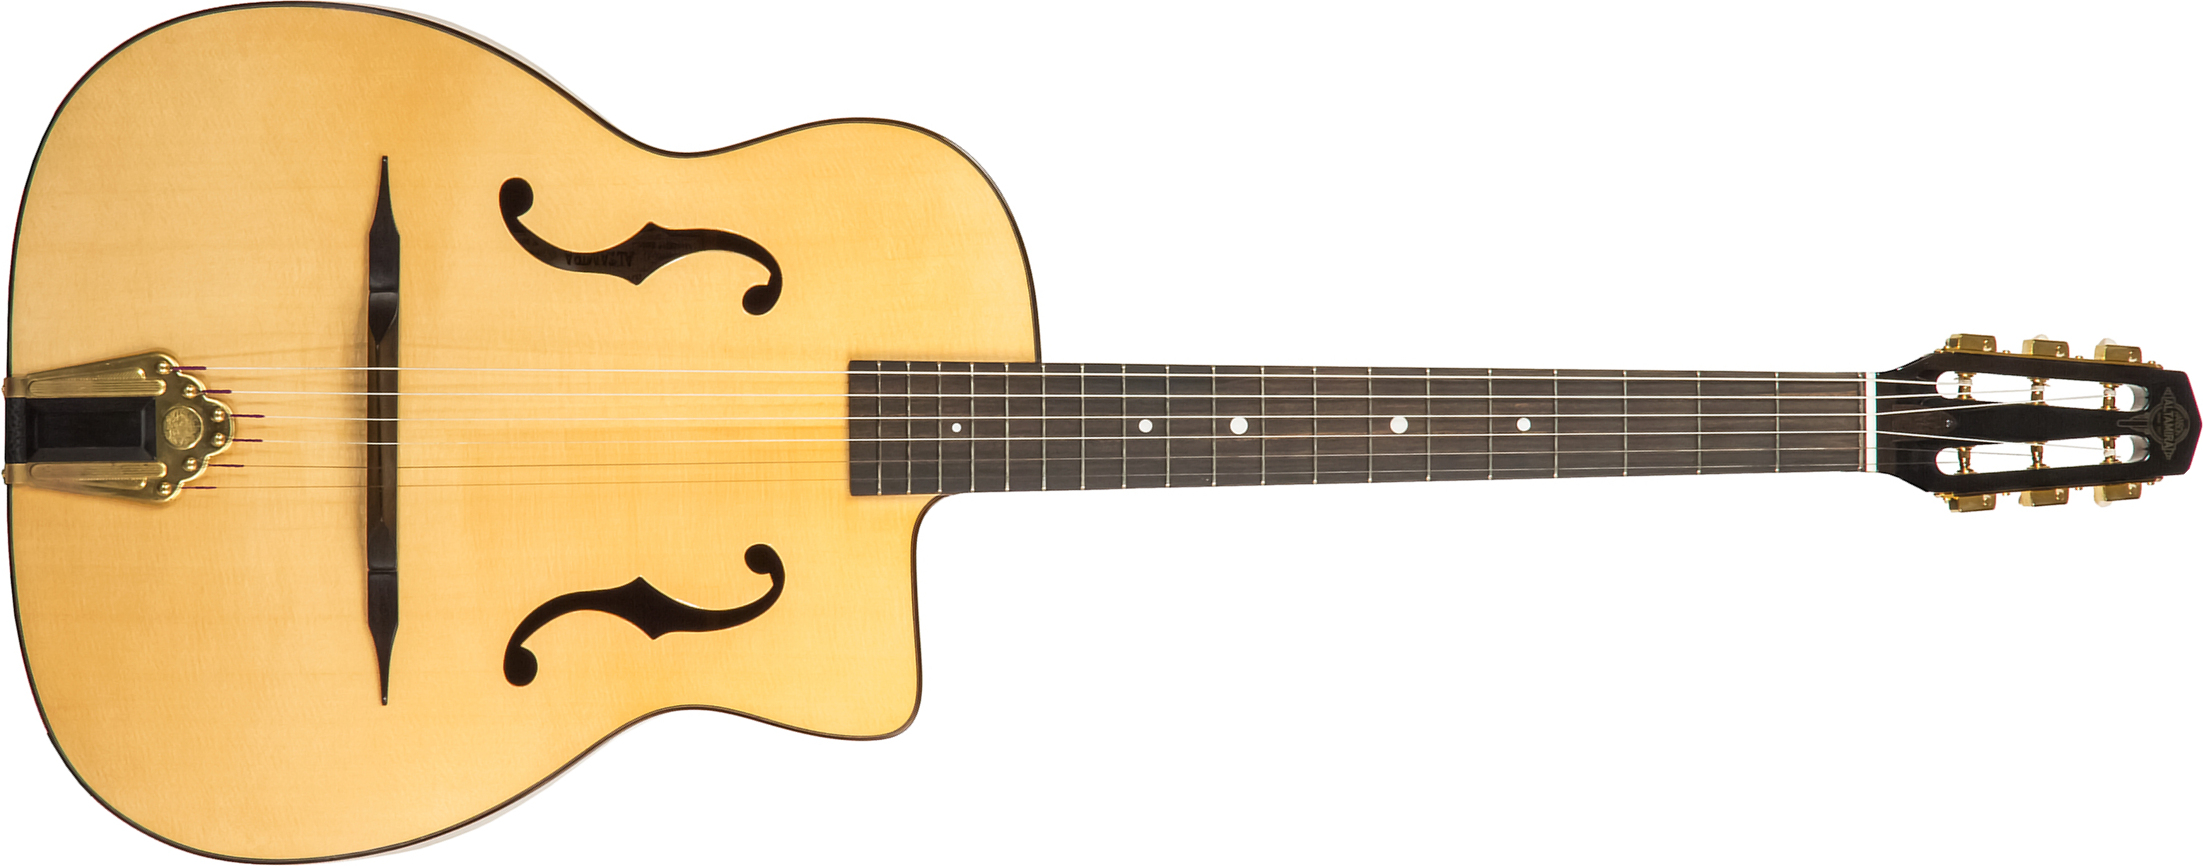 Altamira M01f Gypsy Jazz Cw Epicea Palissandre Eb - Natural Gloss - Guitarra Gypsy - Main picture